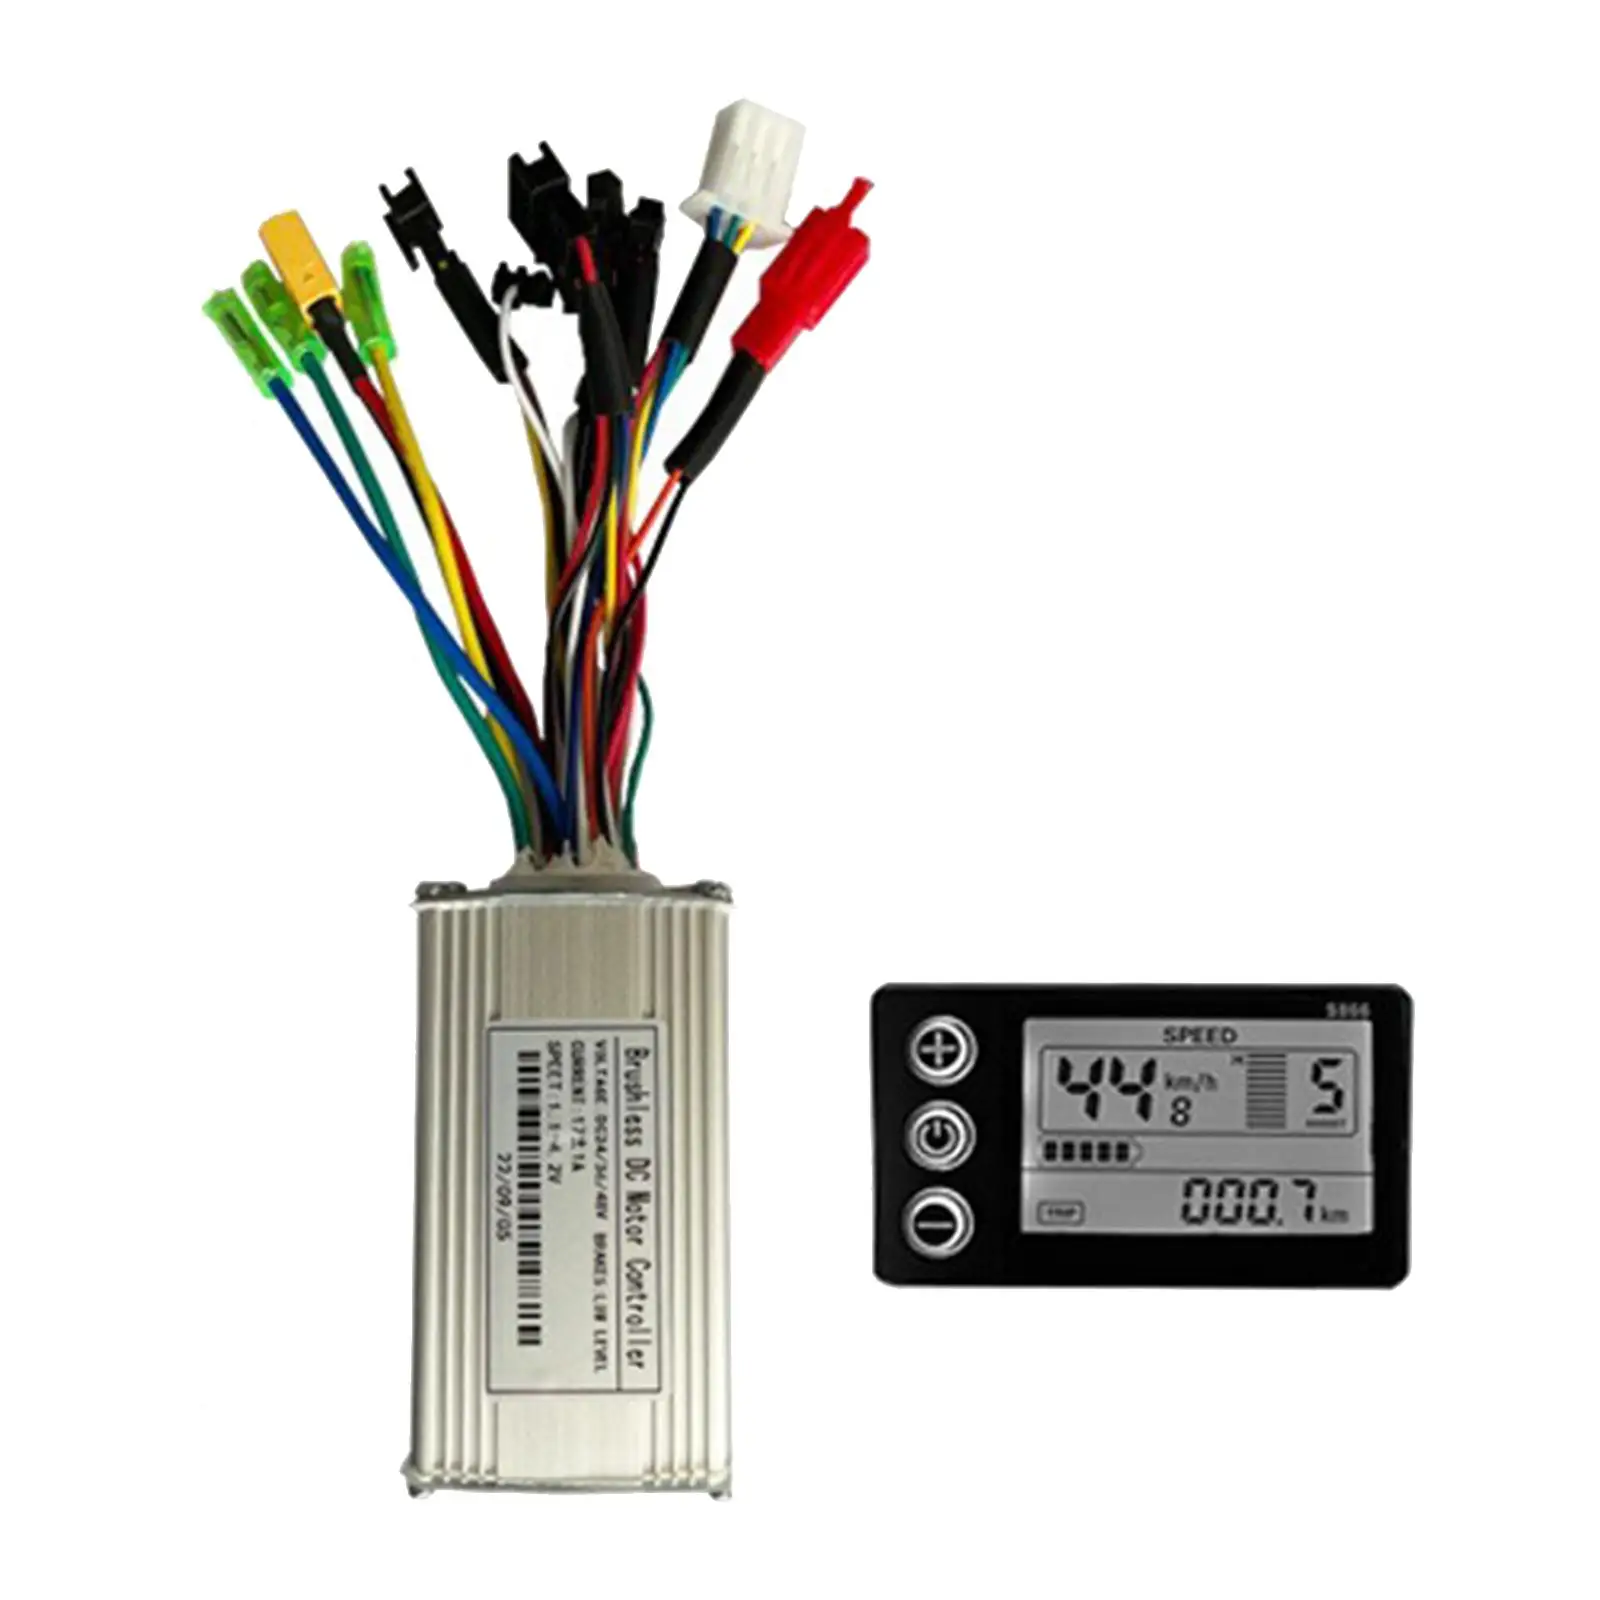 Motor Brushless Controller LCD Panel Steady Speed Lightweight Fittings for Electric Bike